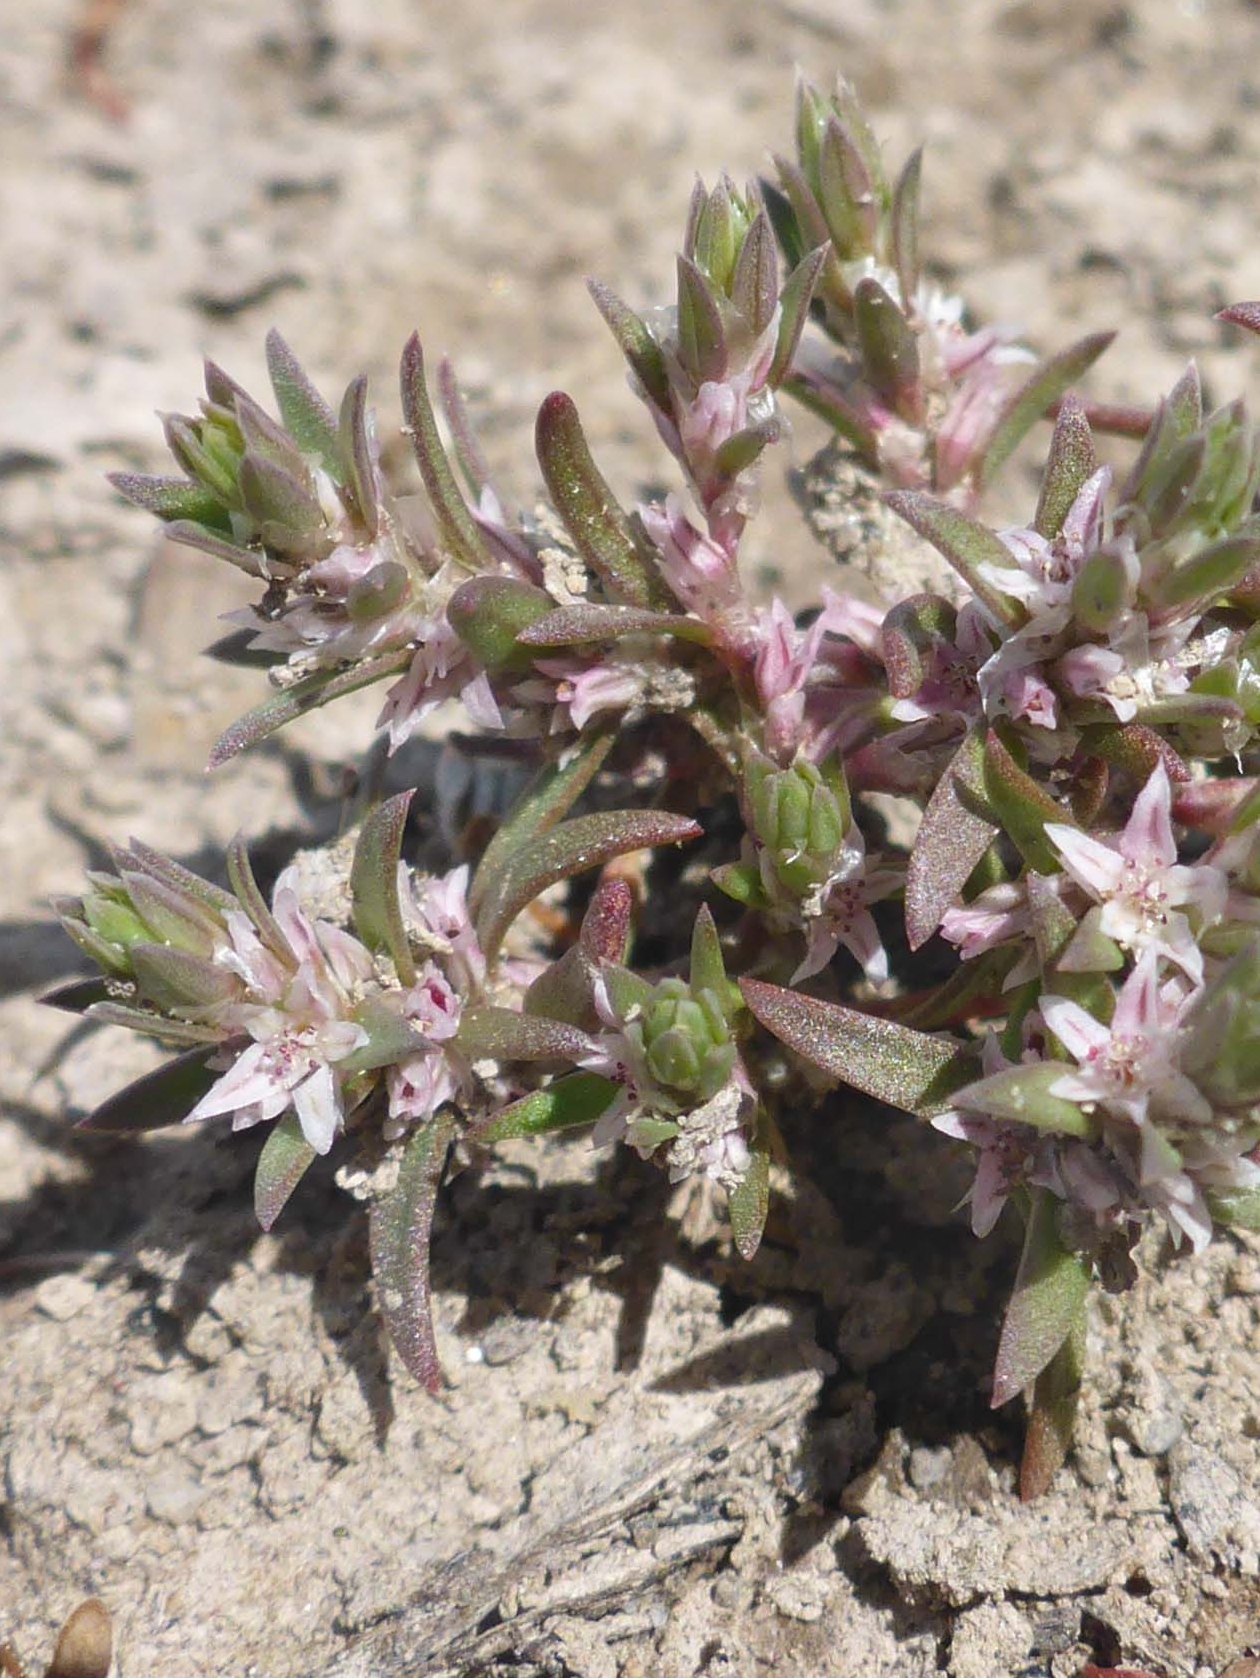 Modoc County knotweed. D. Burk. Photo taken May 28, 2023, by Don Burk, at Butte Valley Grasslands.